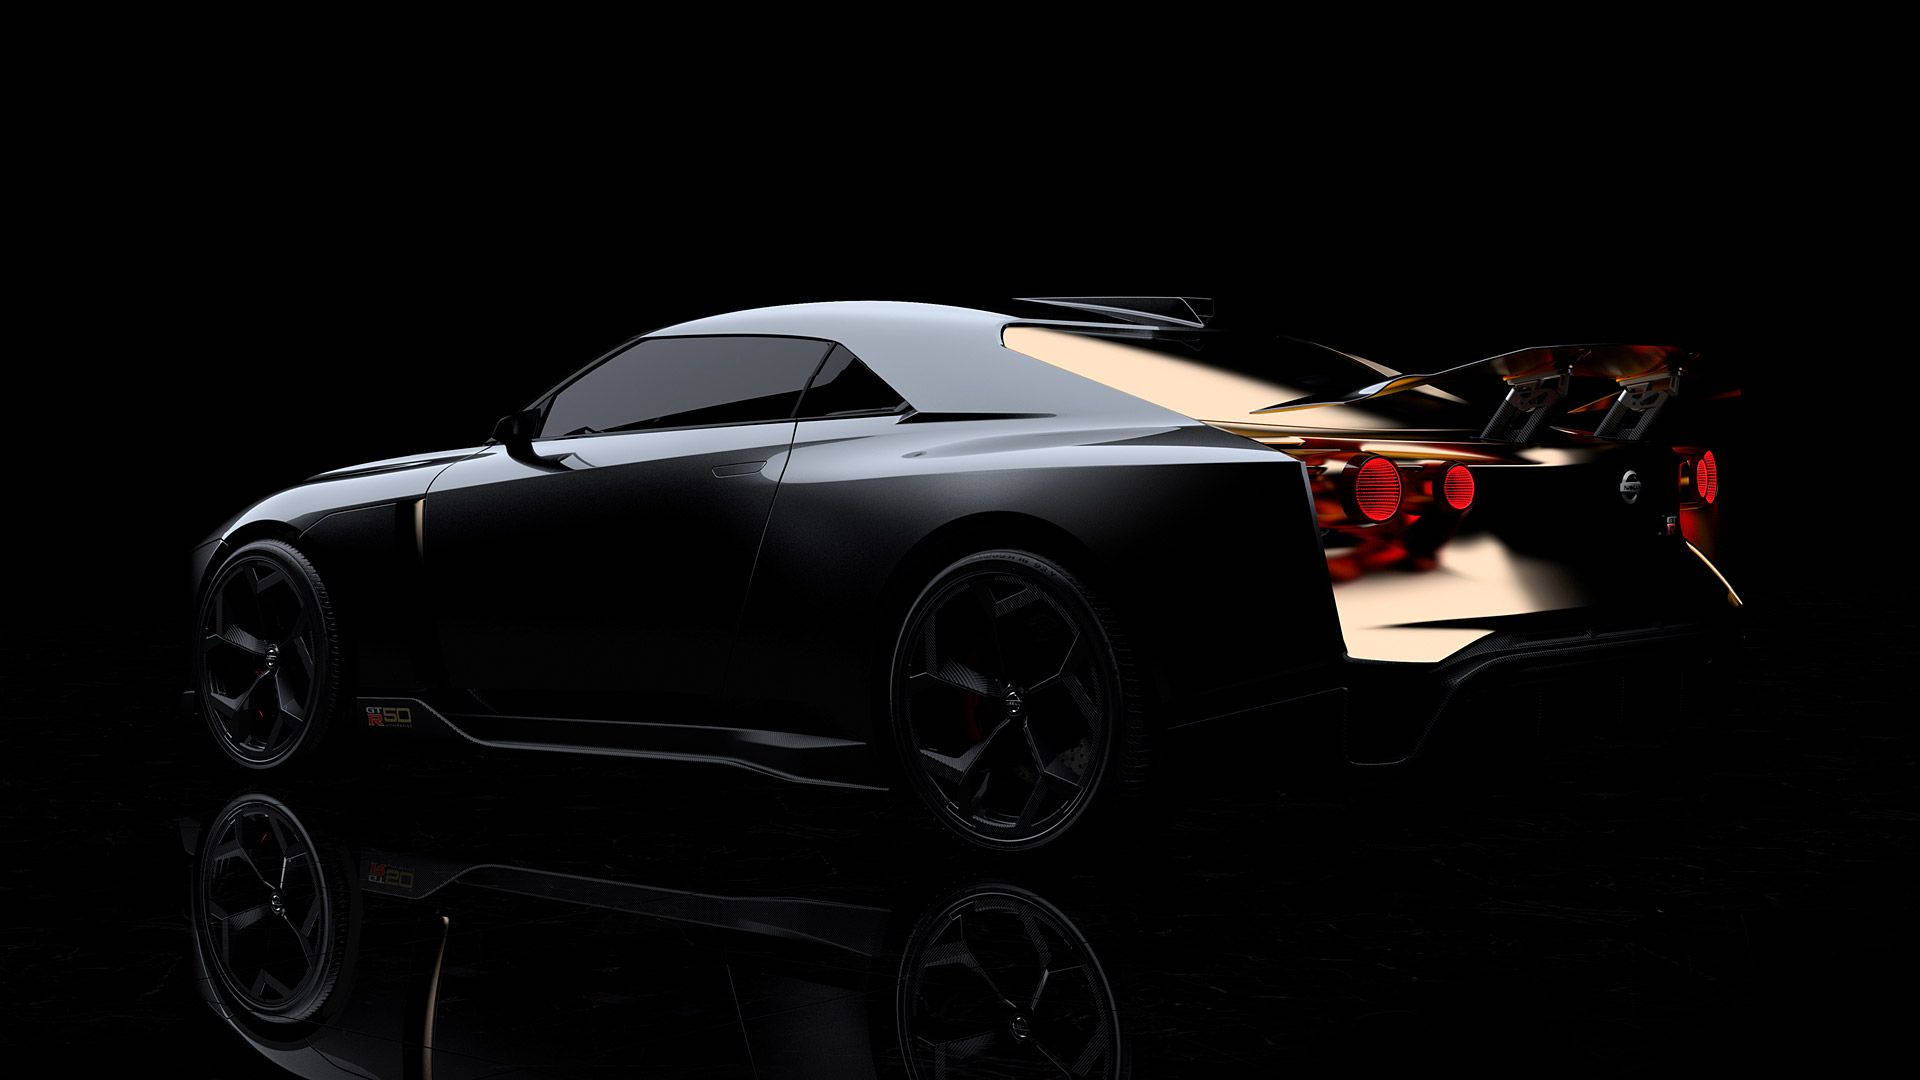 Free Nissan Wallpaper Downloads, [300+] Nissan Wallpapers for FREE |  